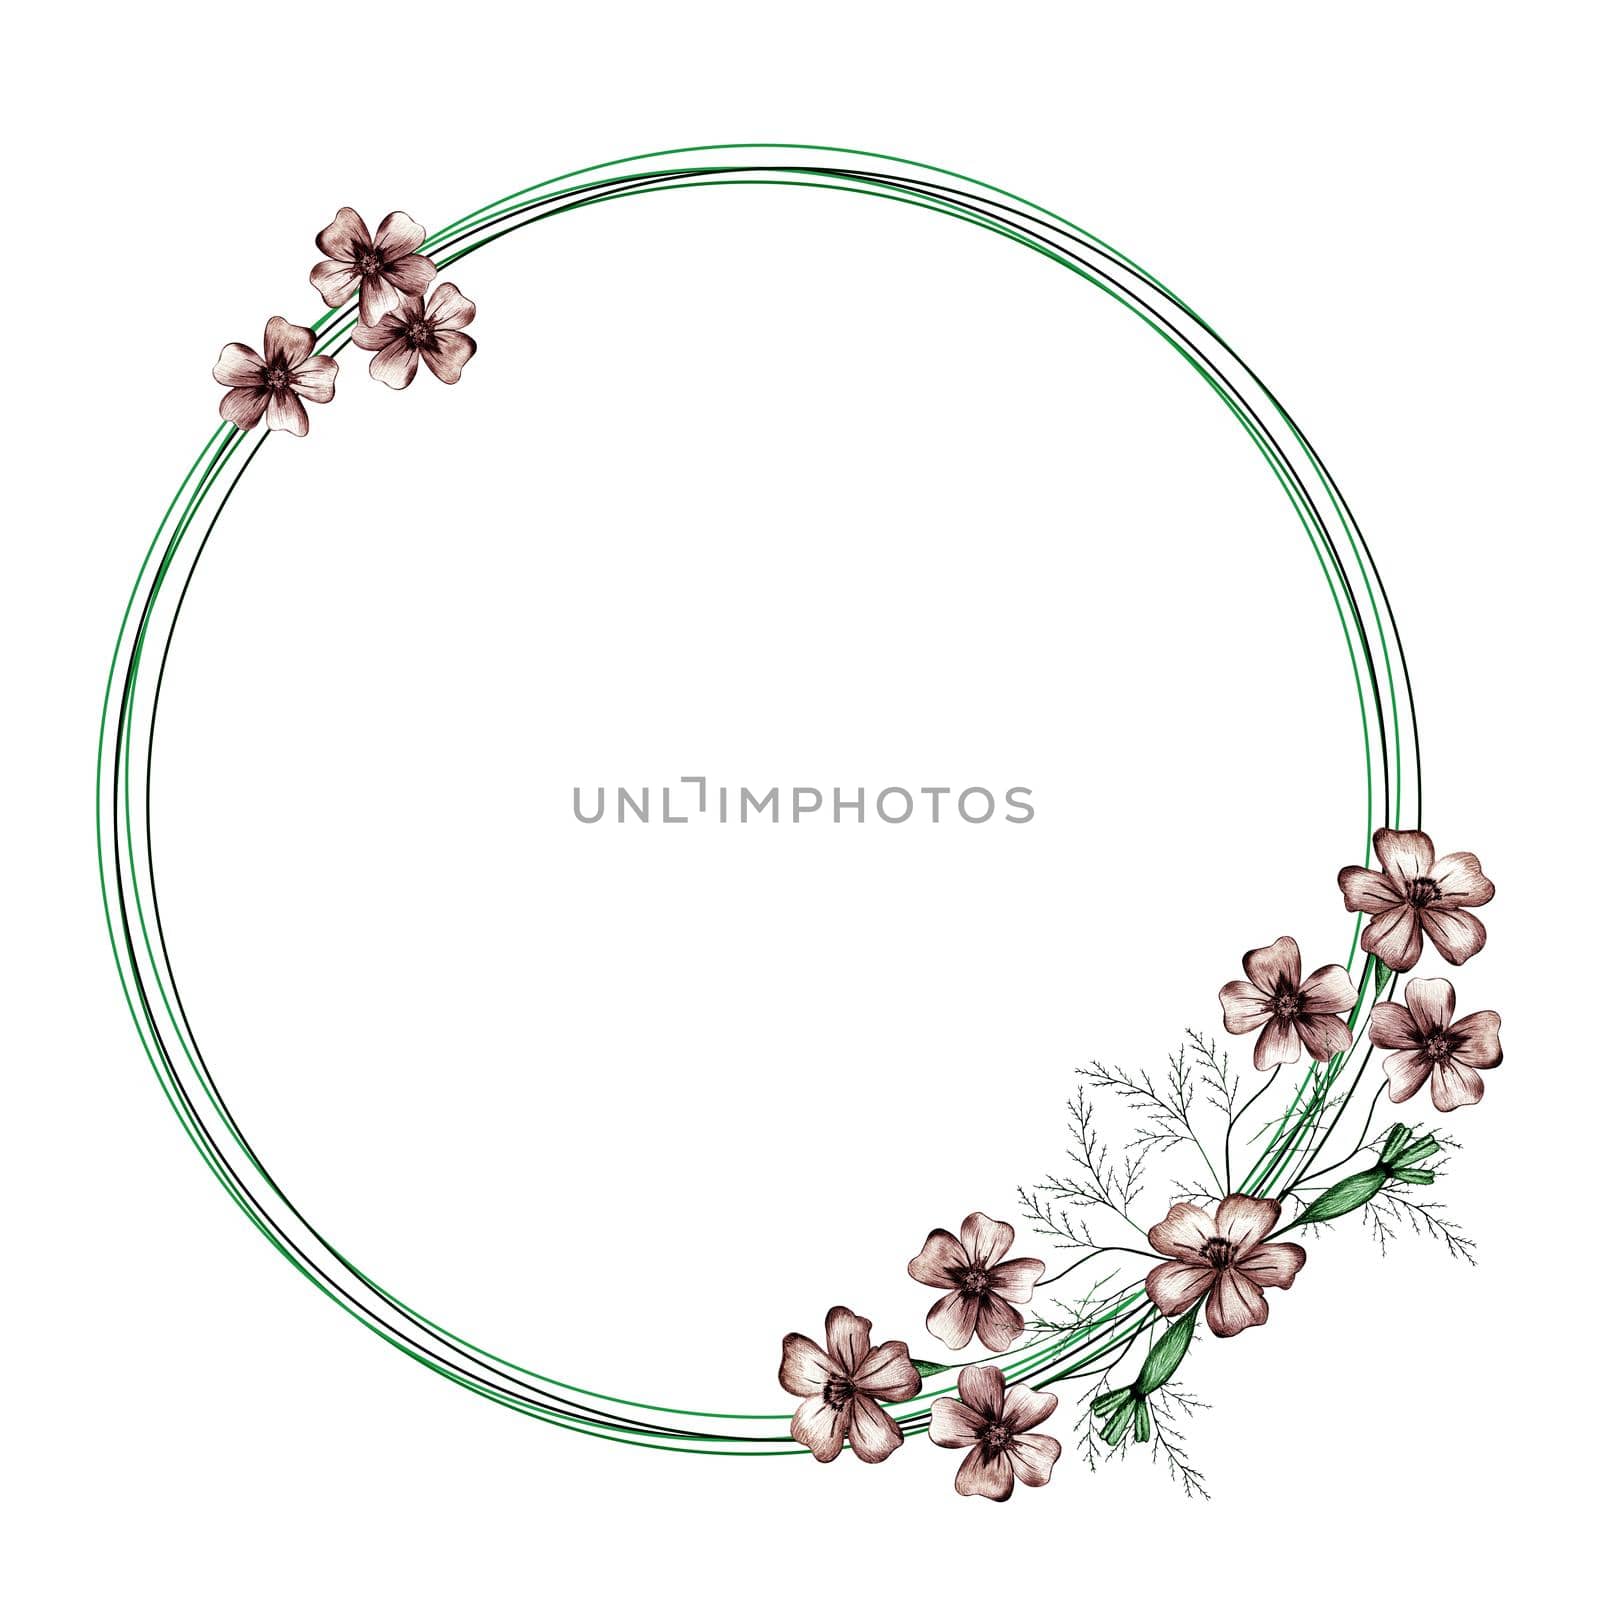 Cute Wreath with Flowers, Leaves and Branches. Circle Frame for Your Text on White Background. by Rina_Dozornaya